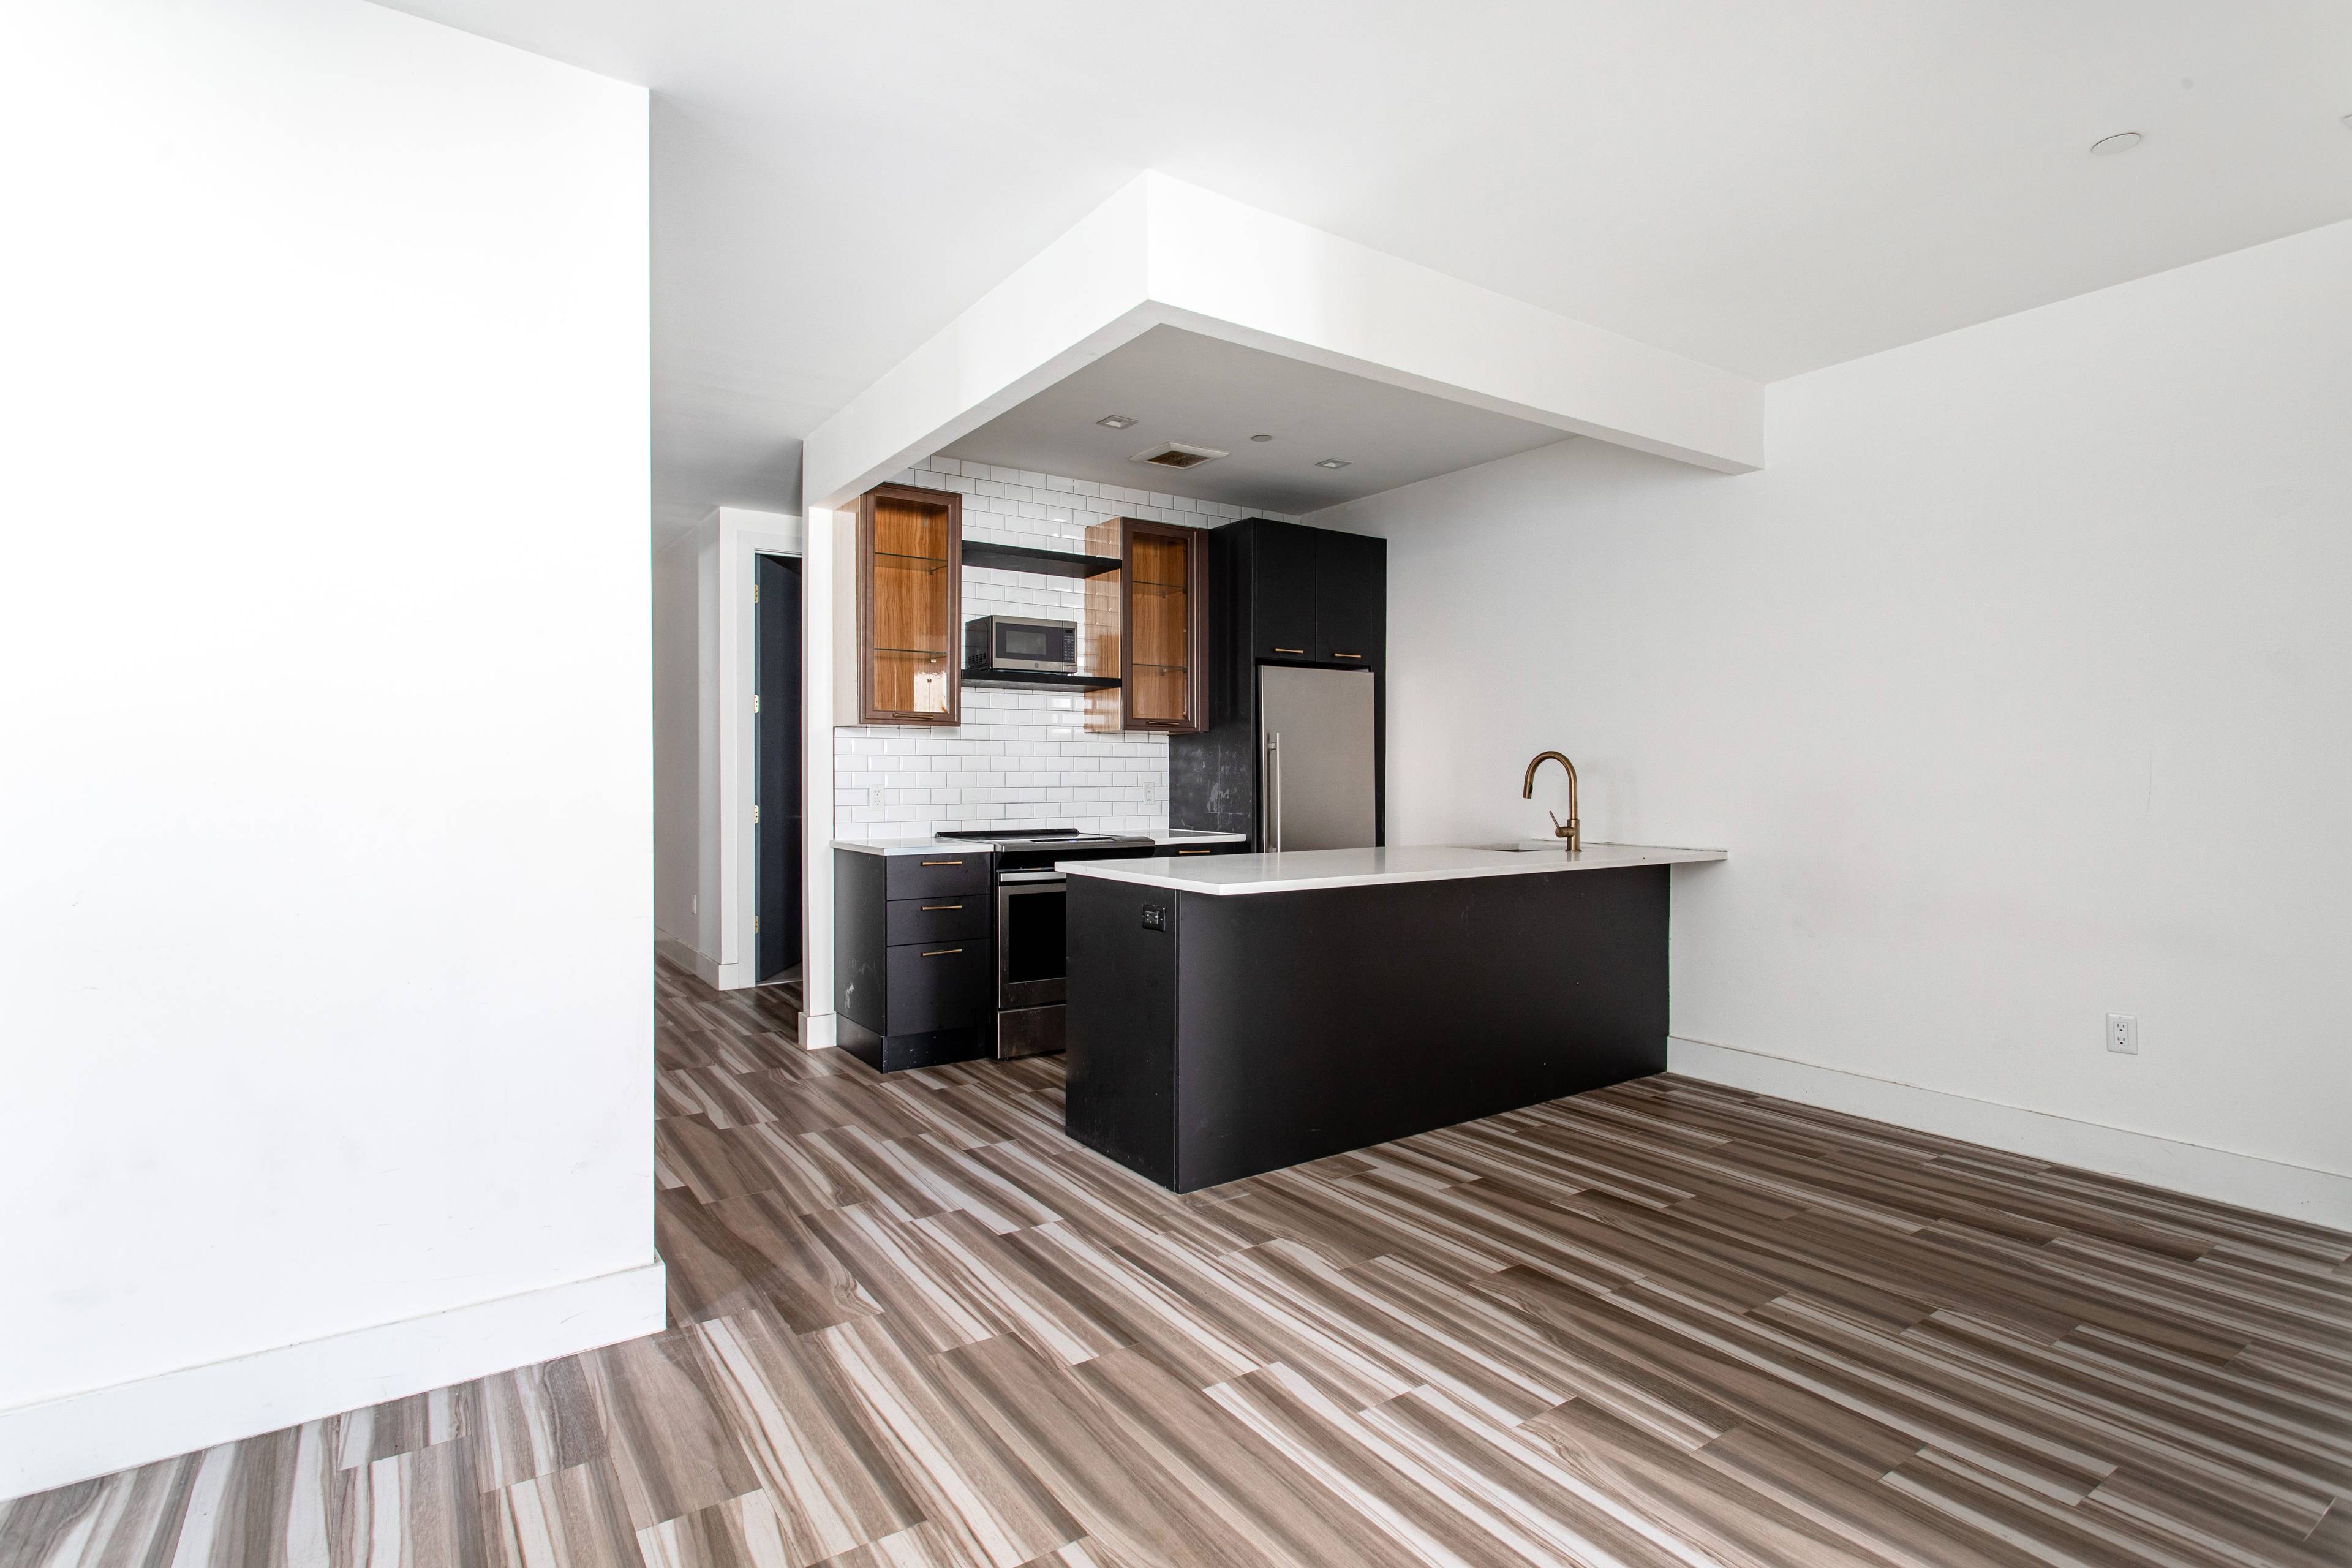 OFFERING 2 MONTHS FREE RENT Residence 1C at 709 Hart Street presents a well appointed contemporary two bedroom, one and one half bathroom DUPLEX layout offering condominium level finishes, spacious ...